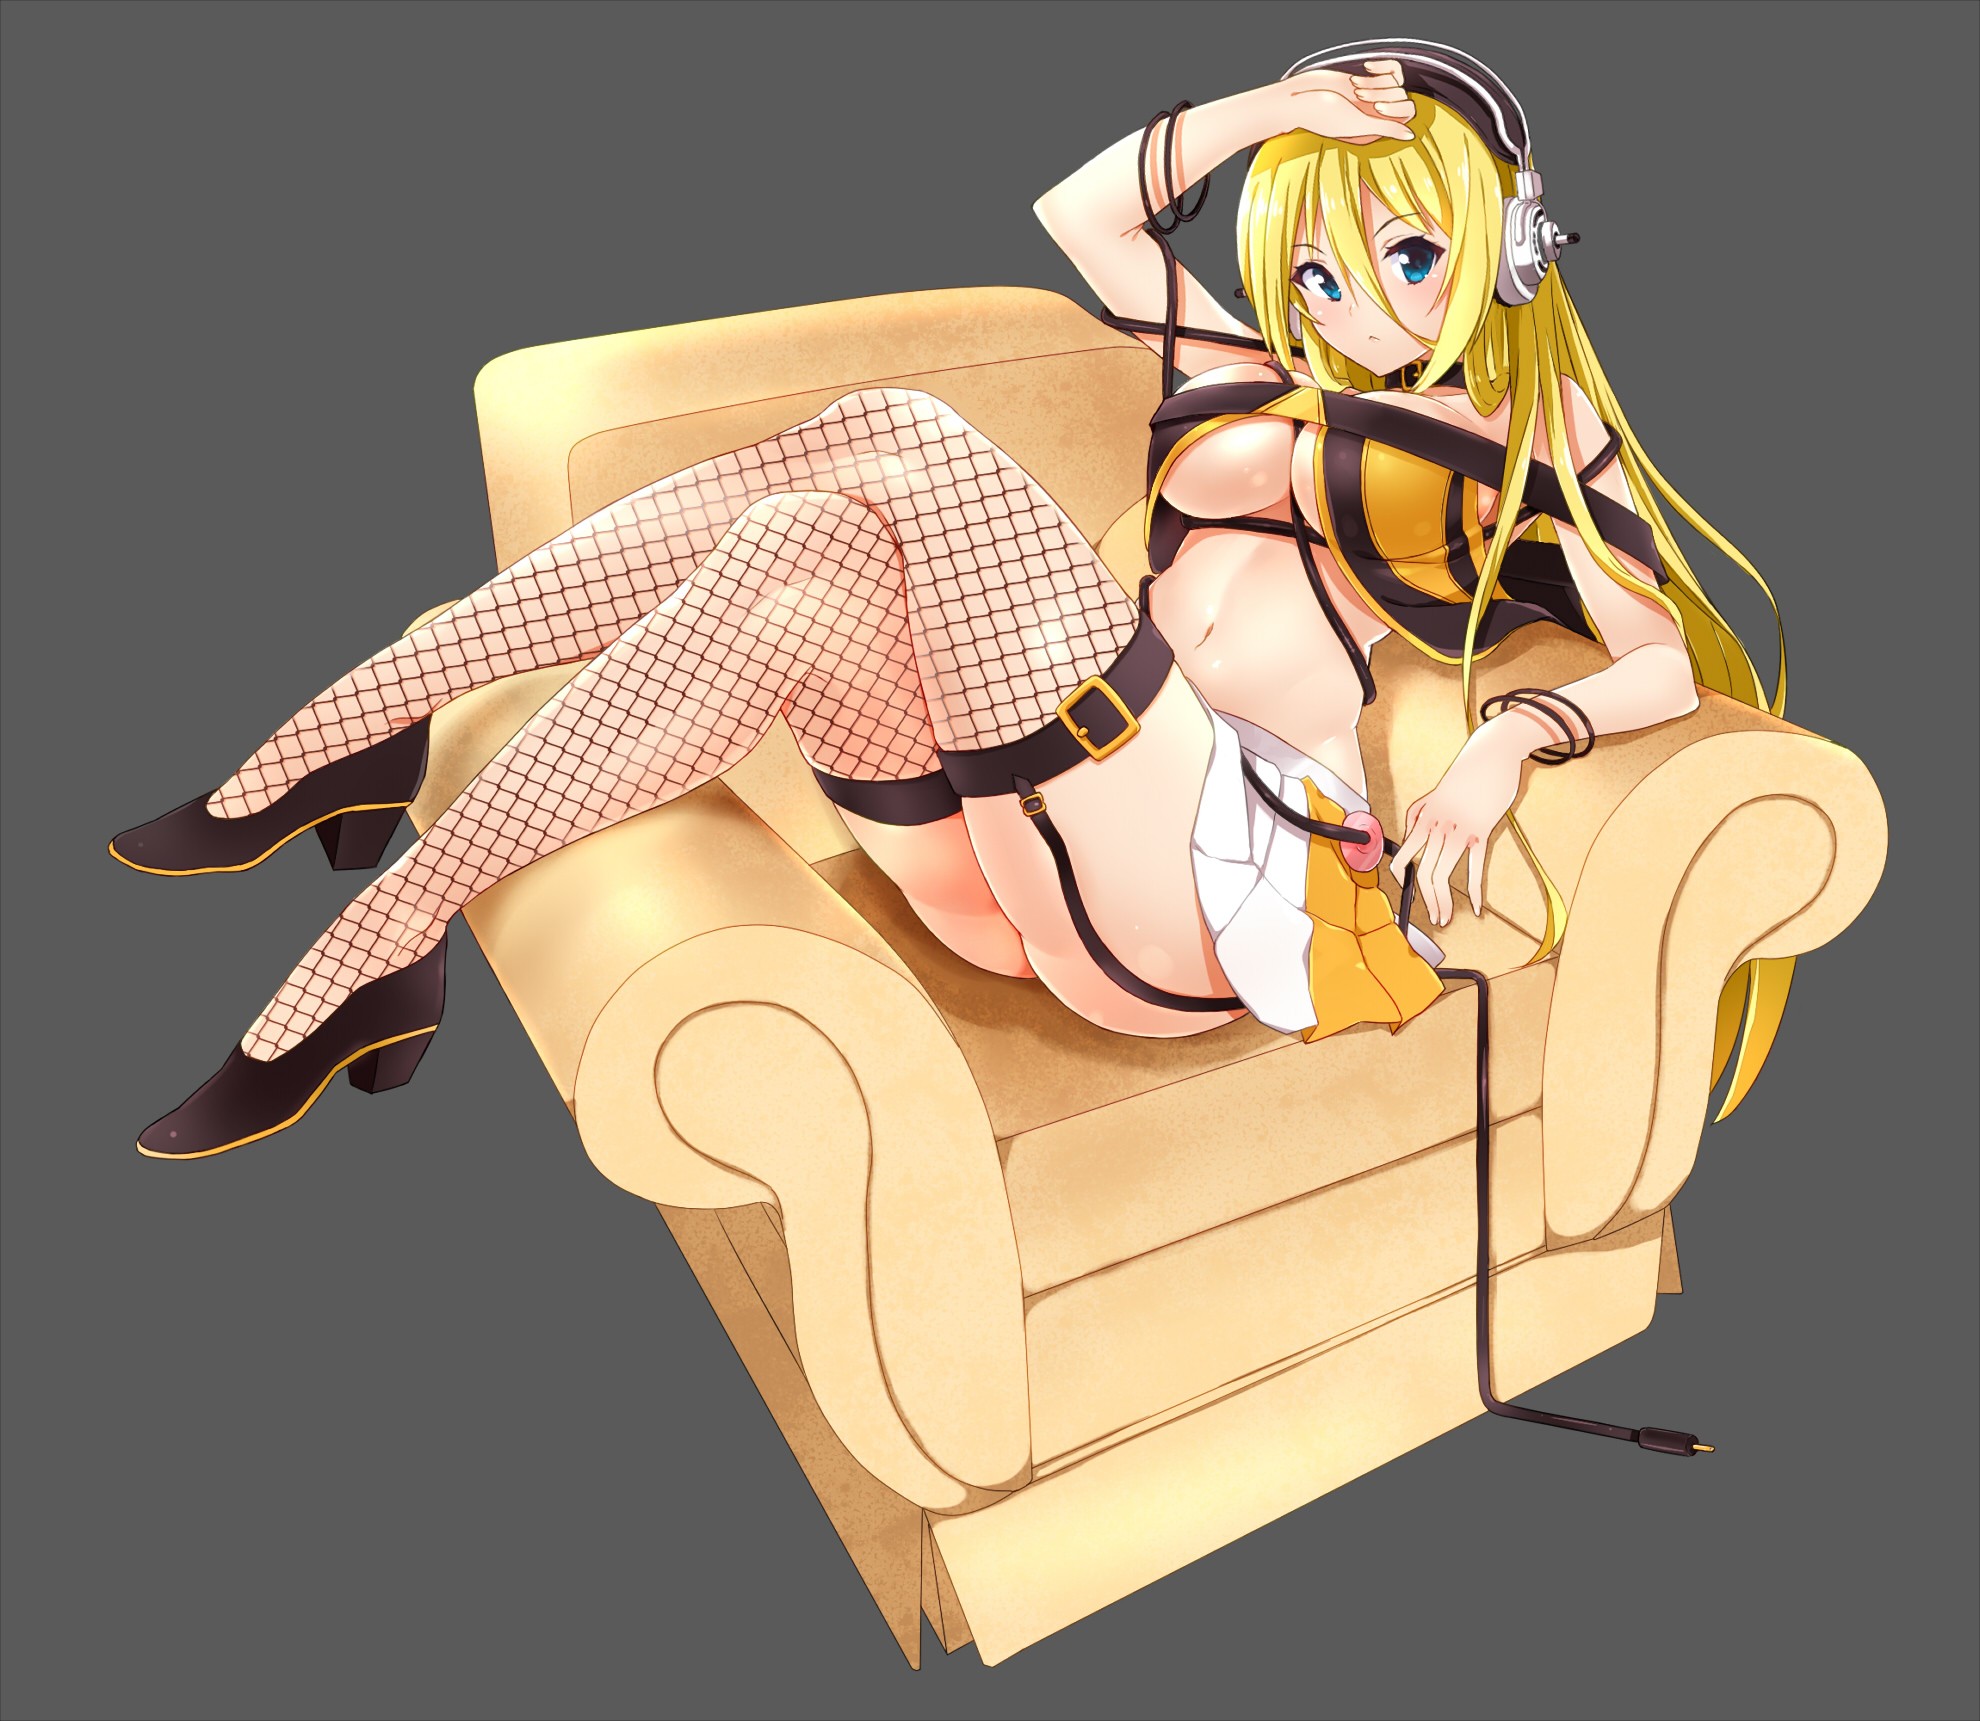 Anime 1980x1721 anime anime girls Vocaloid Lily (Vocaloid) cleavage headphones heels no bra stockings nopan underboob ecchi thighs legs gray background boobs big boobs legs crossed looking at viewer long hair